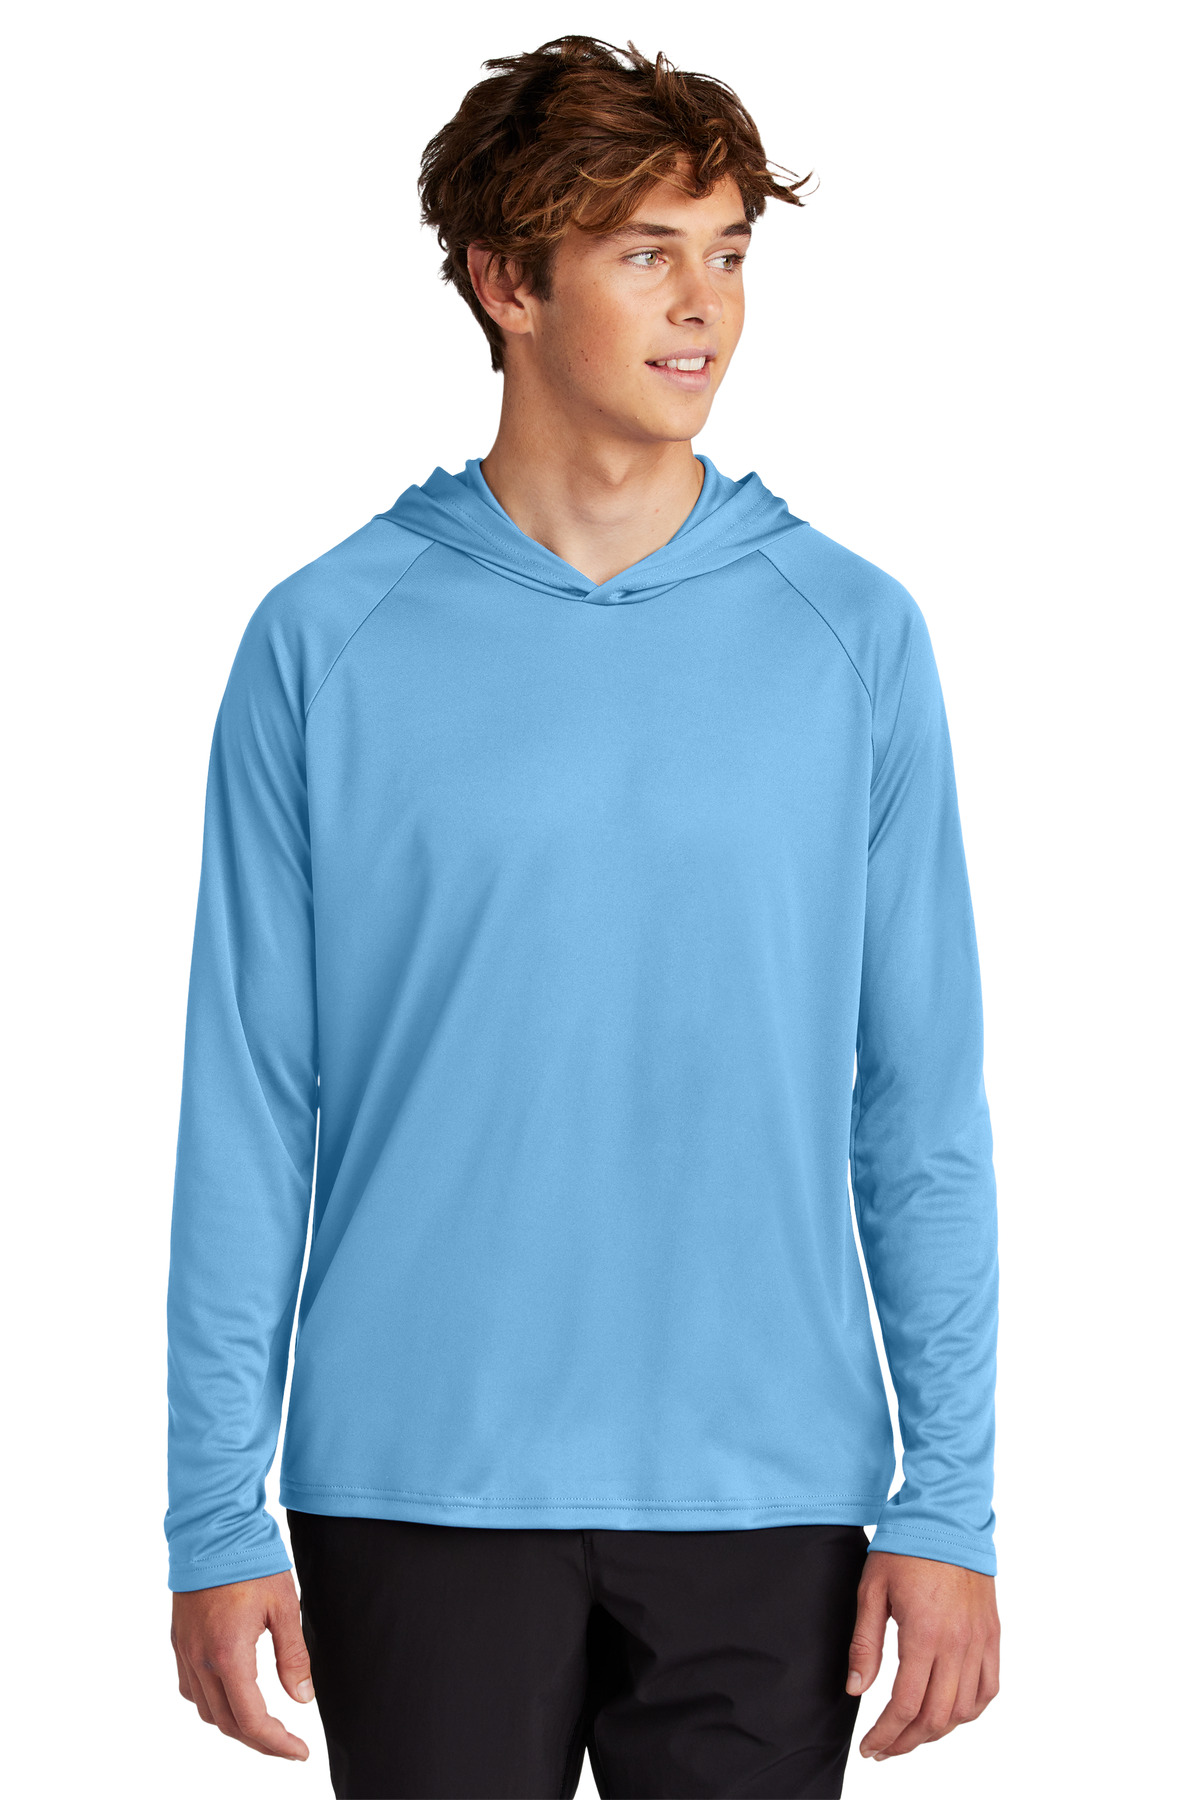 Port & Company Performance Pullover Hooded T-Shirt PC380H